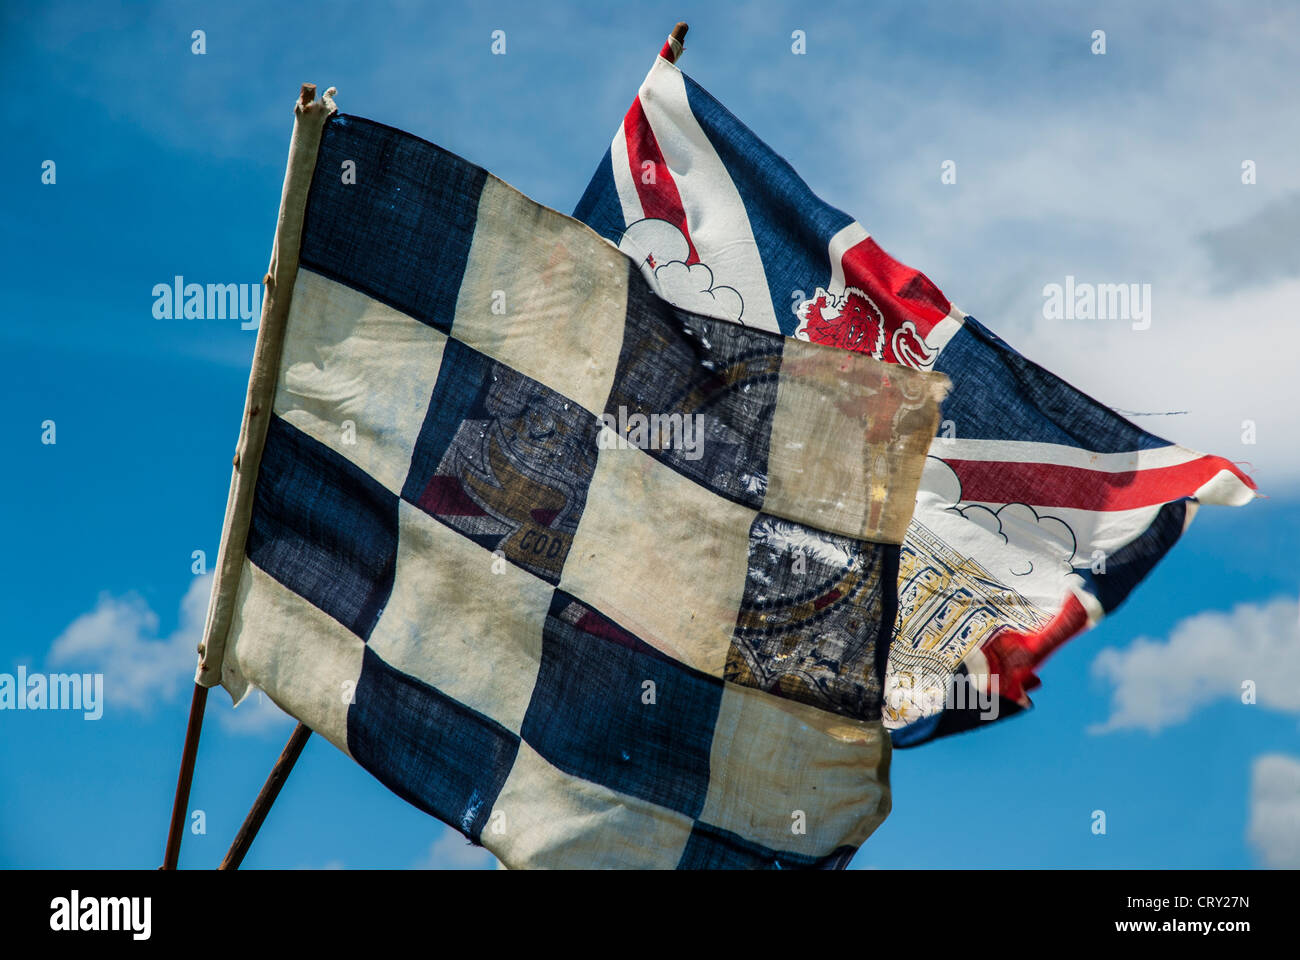 flags blowing in the wind against a blue and white sky Stock Photo